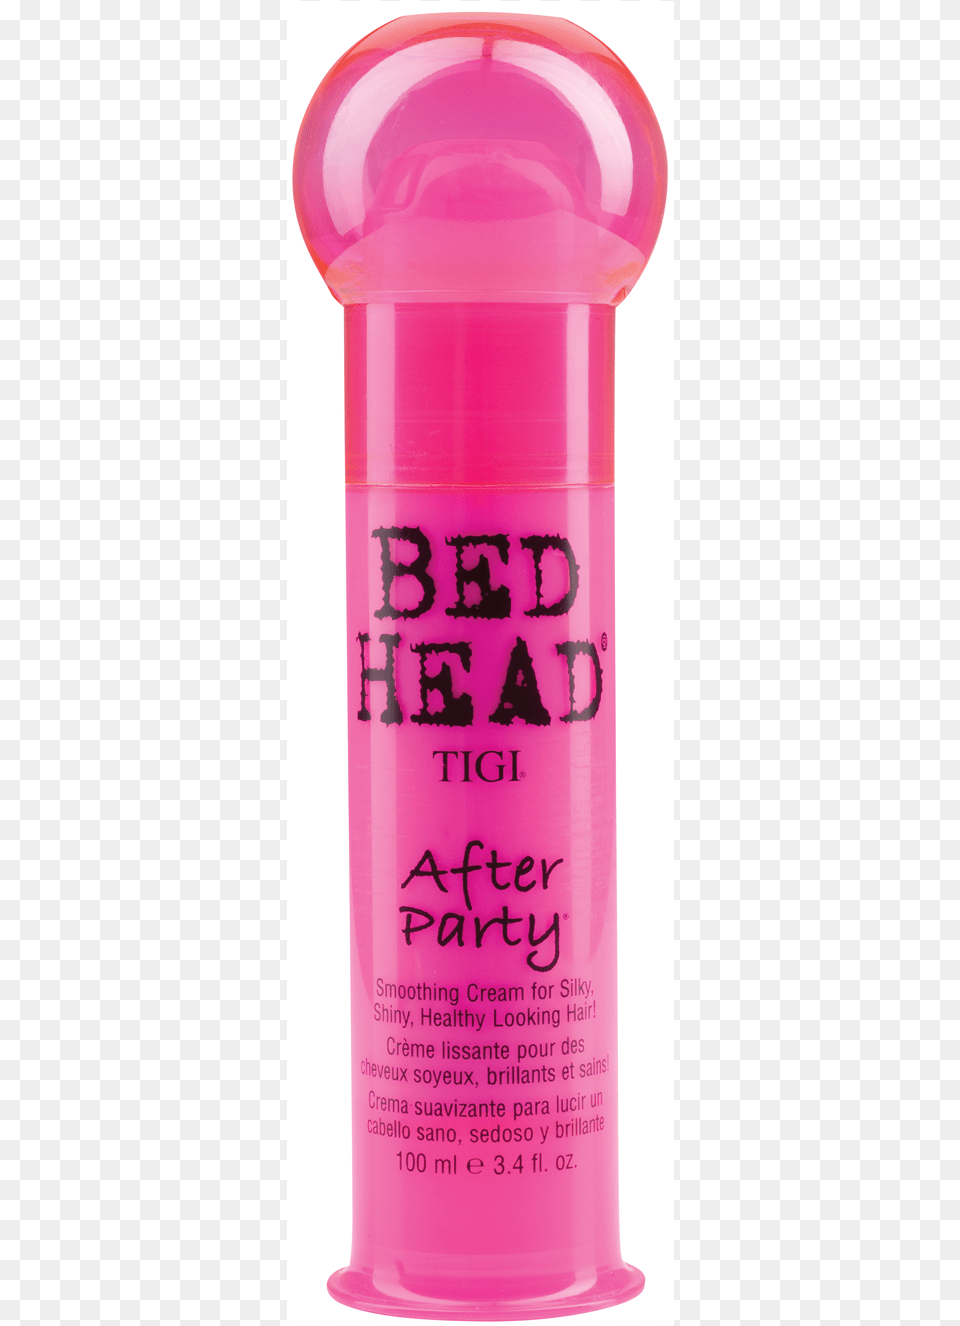 Bed Head After Party Smoothing Cream Tigi Bed Head, Bottle, Cosmetics, Shaker Free Transparent Png